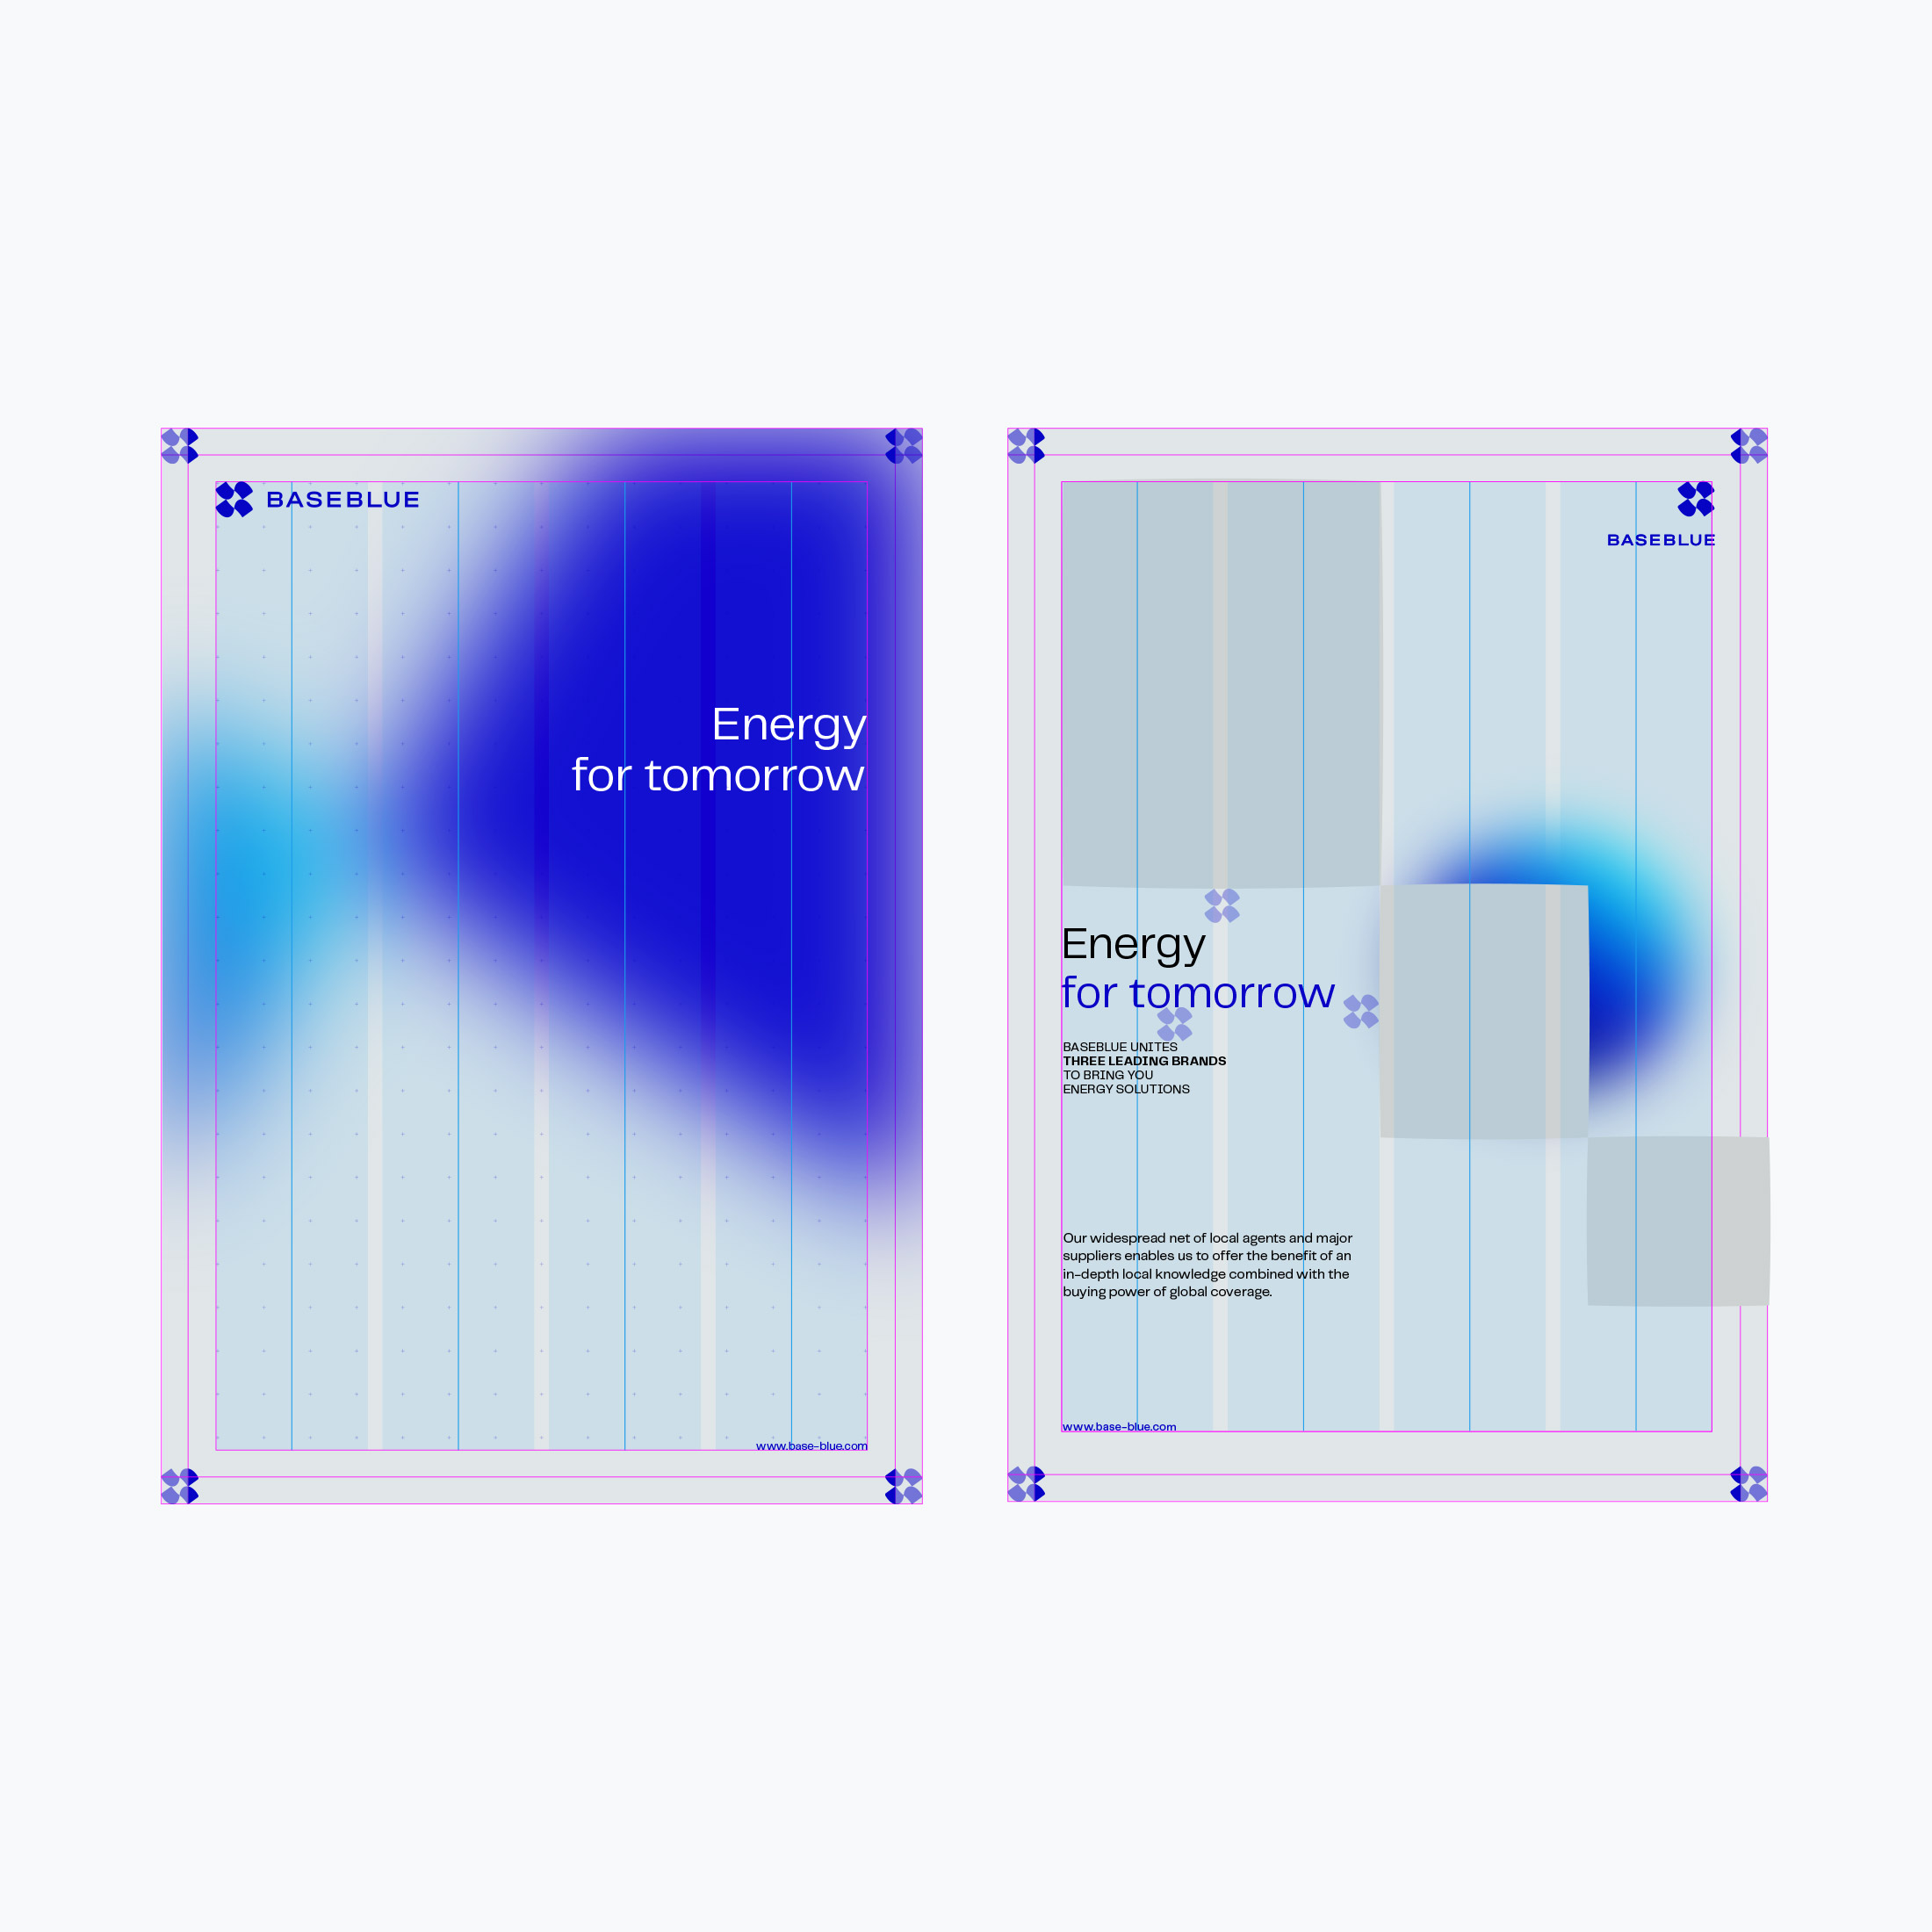 baseblue branding layout guidelines for print analysis kommigraphics